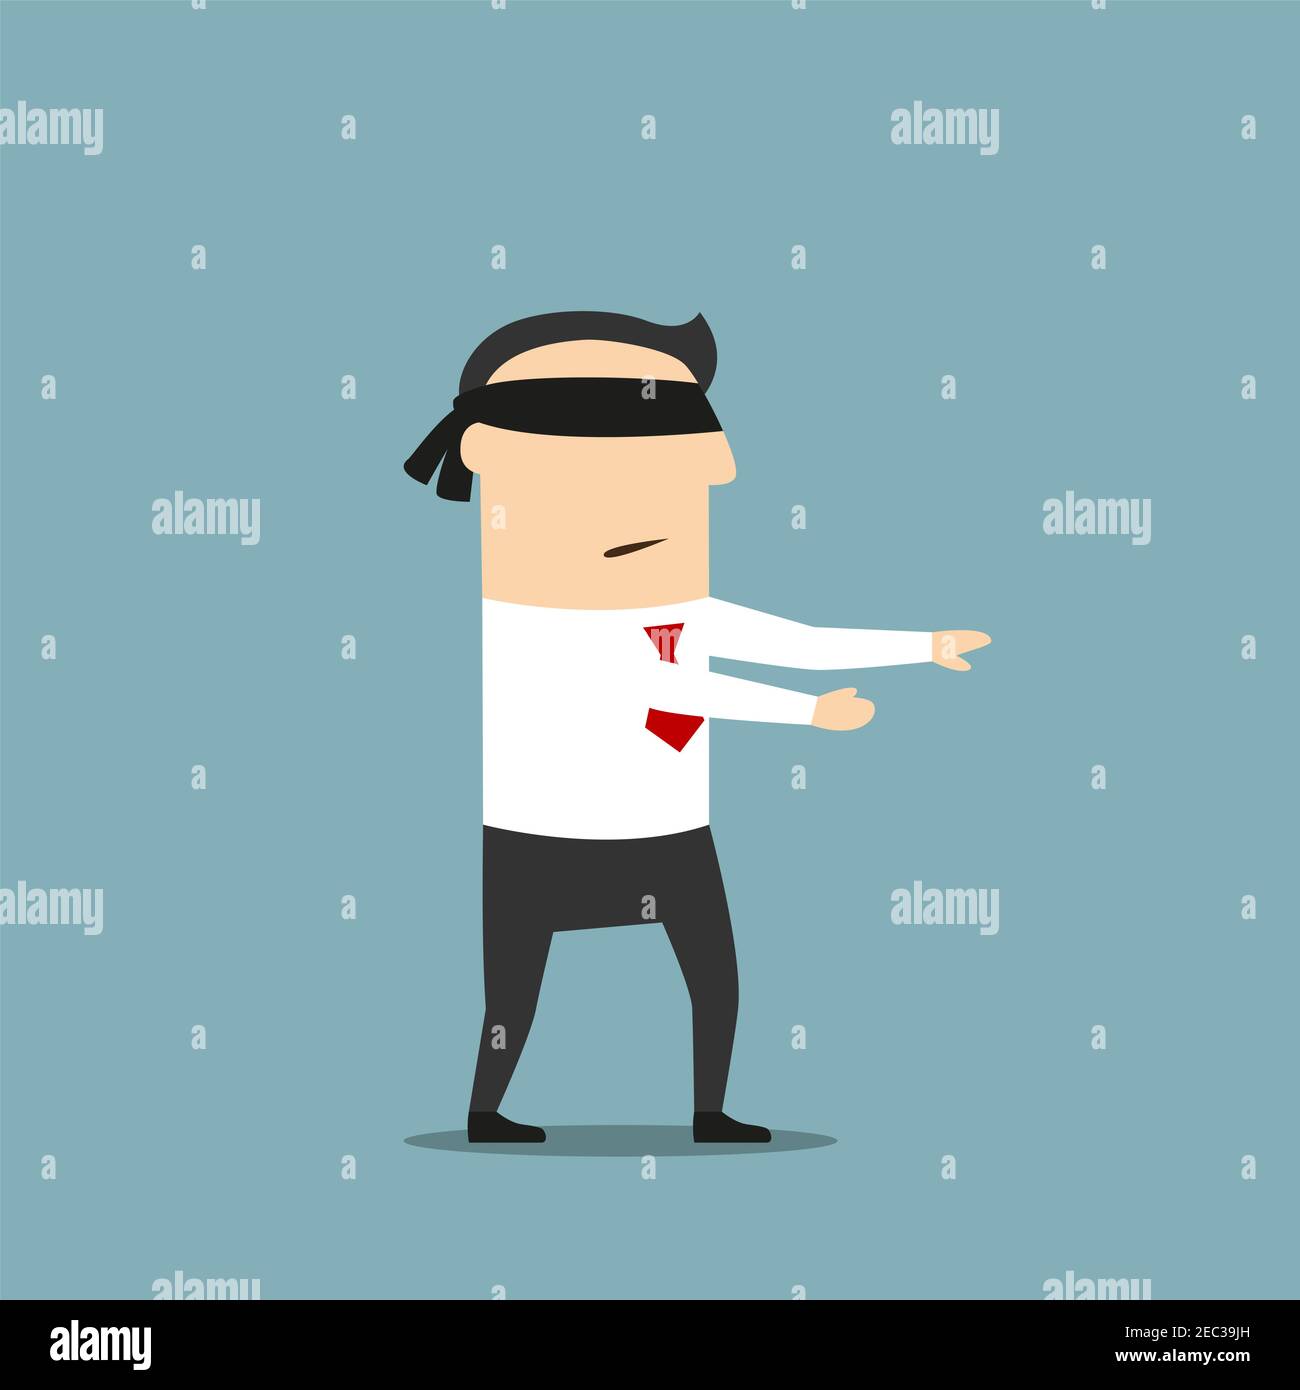 Man stretching his arms out Stock Photo - Alamy